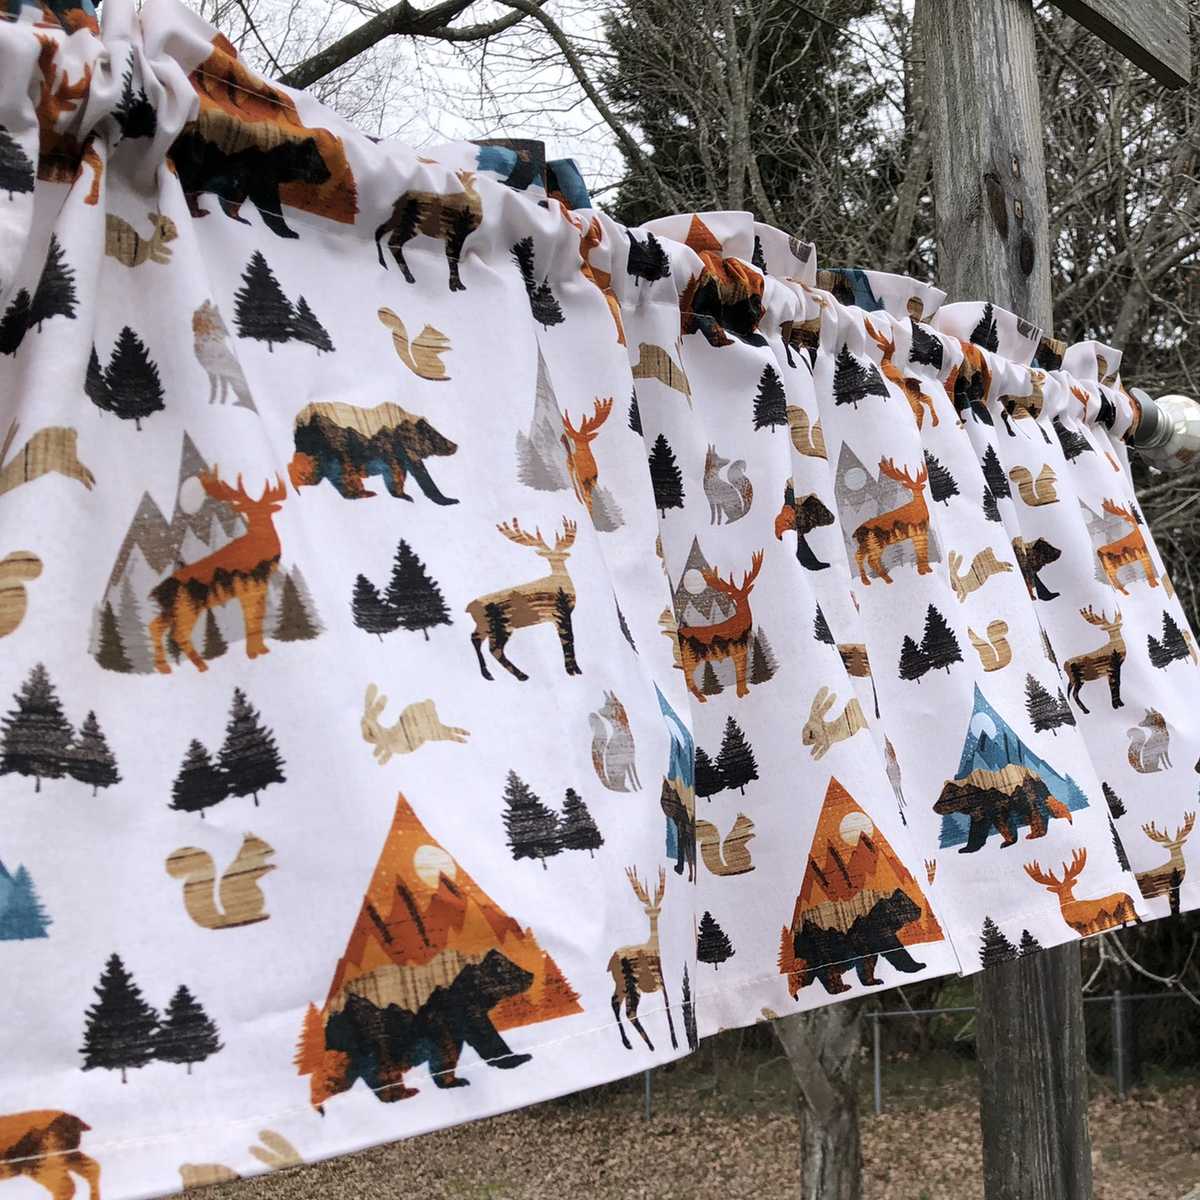 Sunset Animal Woodland Valance Bear Deer Squirrel Rabbit Trees Mountains Cabin Lodge Decor Handcrafted Curtain Valance or Pillow Cover t4/33